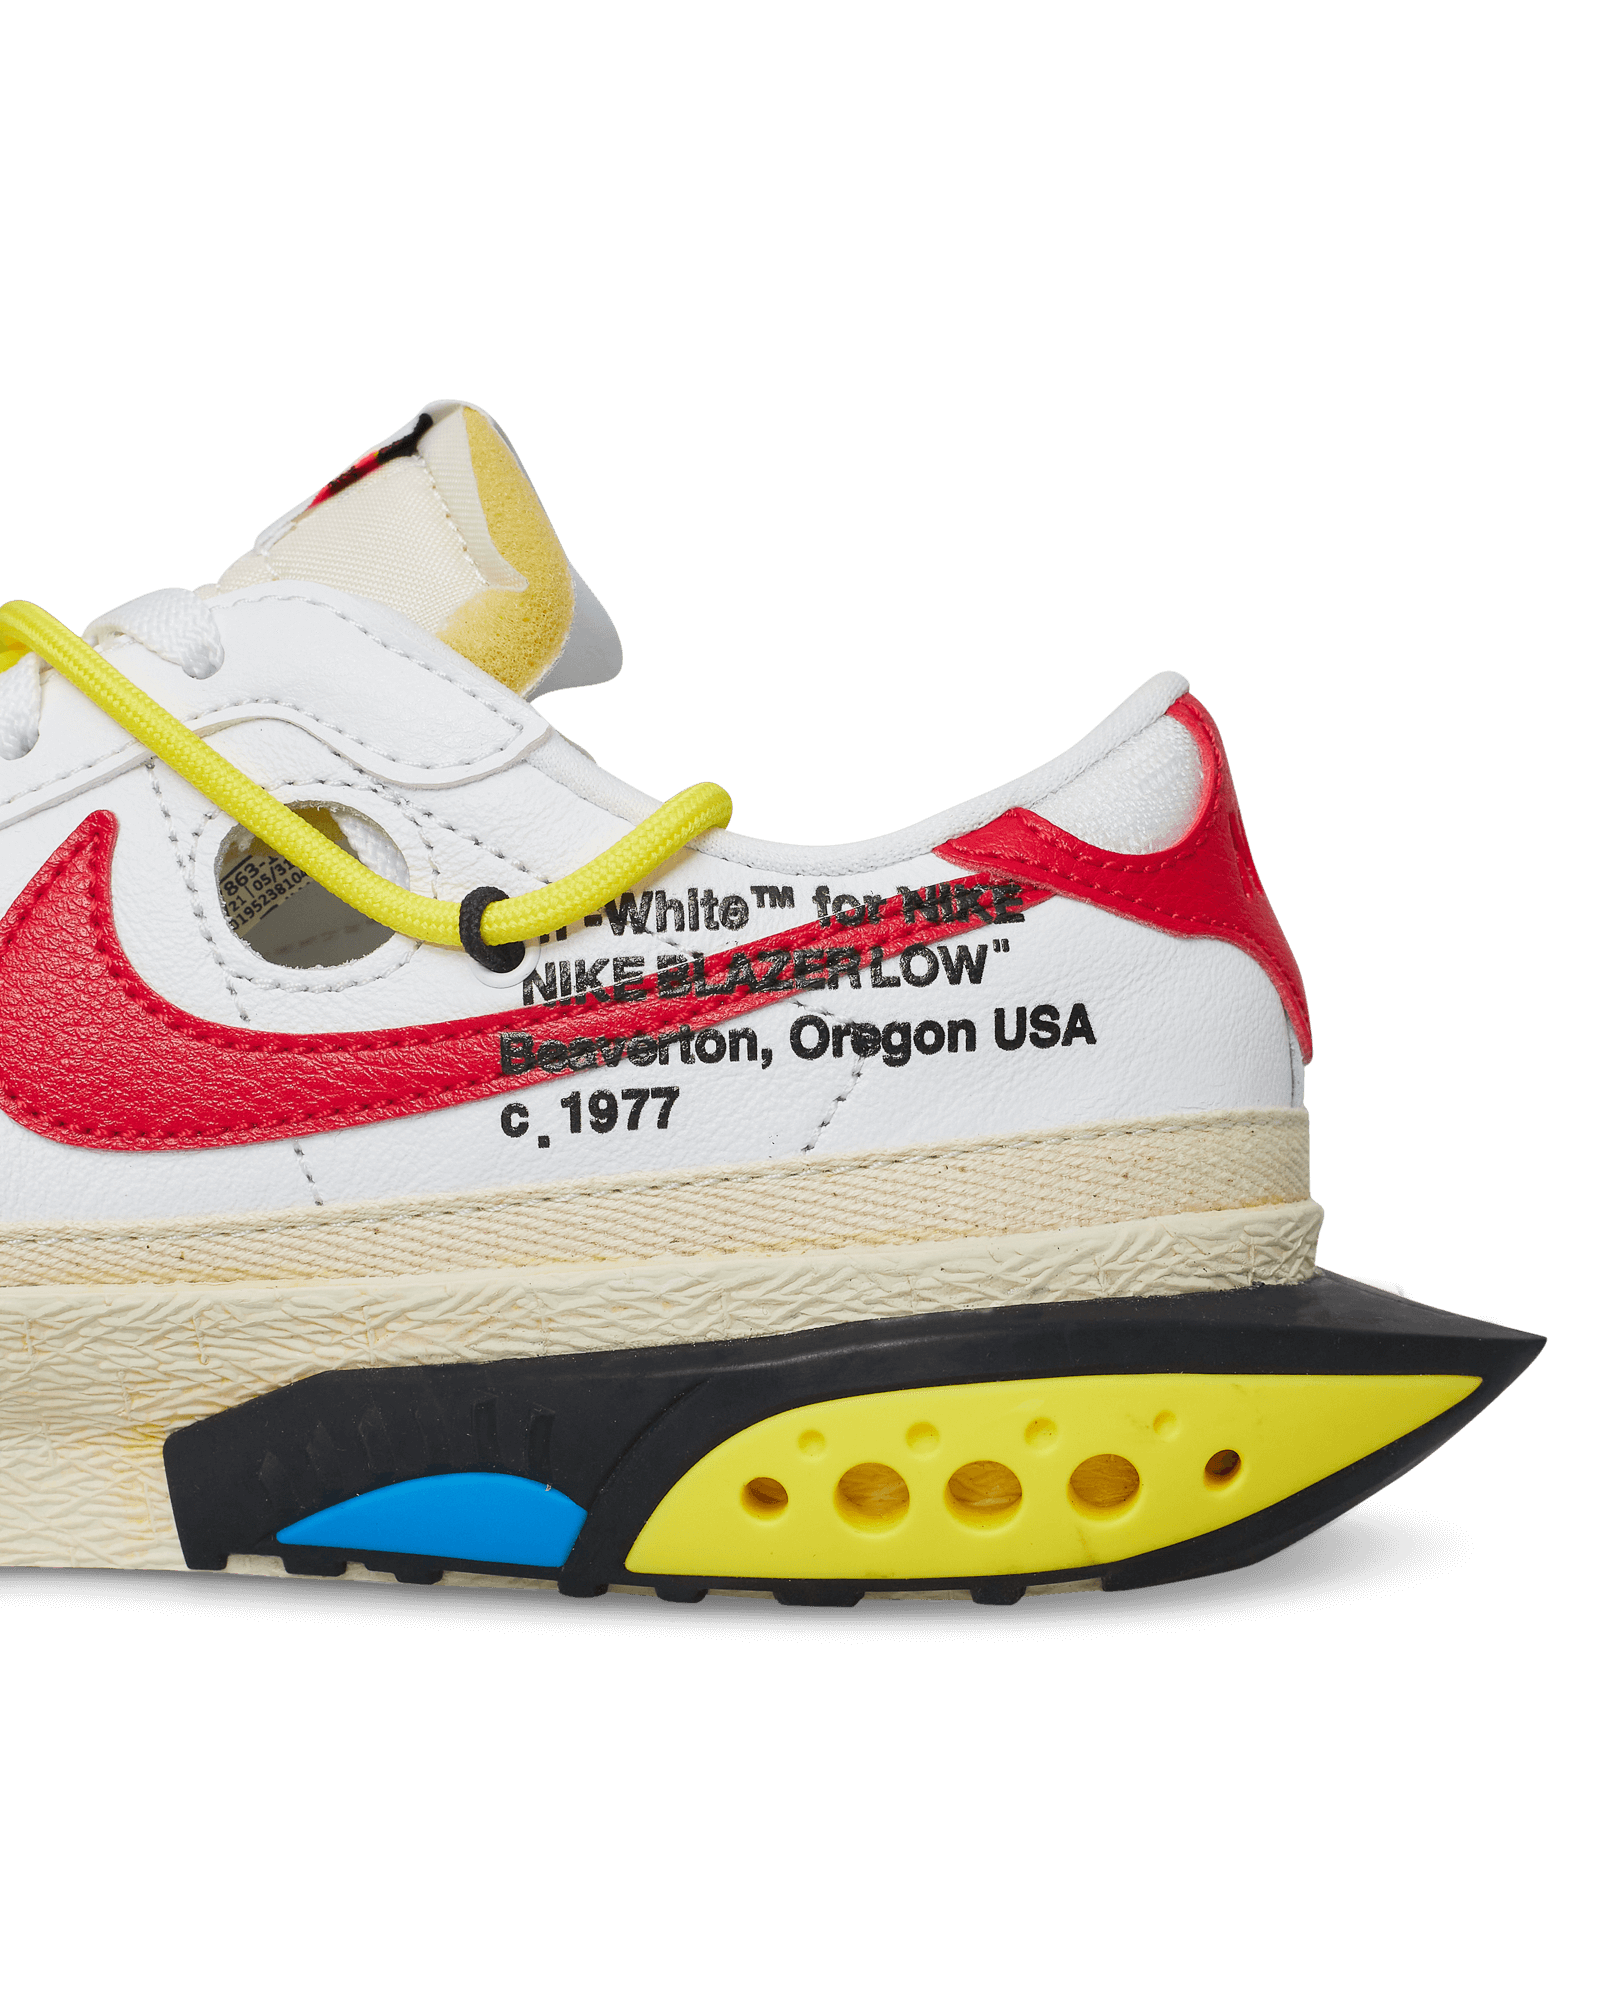 Nike Special Project Blazer Low 77 / Ow White/University Red Sneakers Low DH7863-100